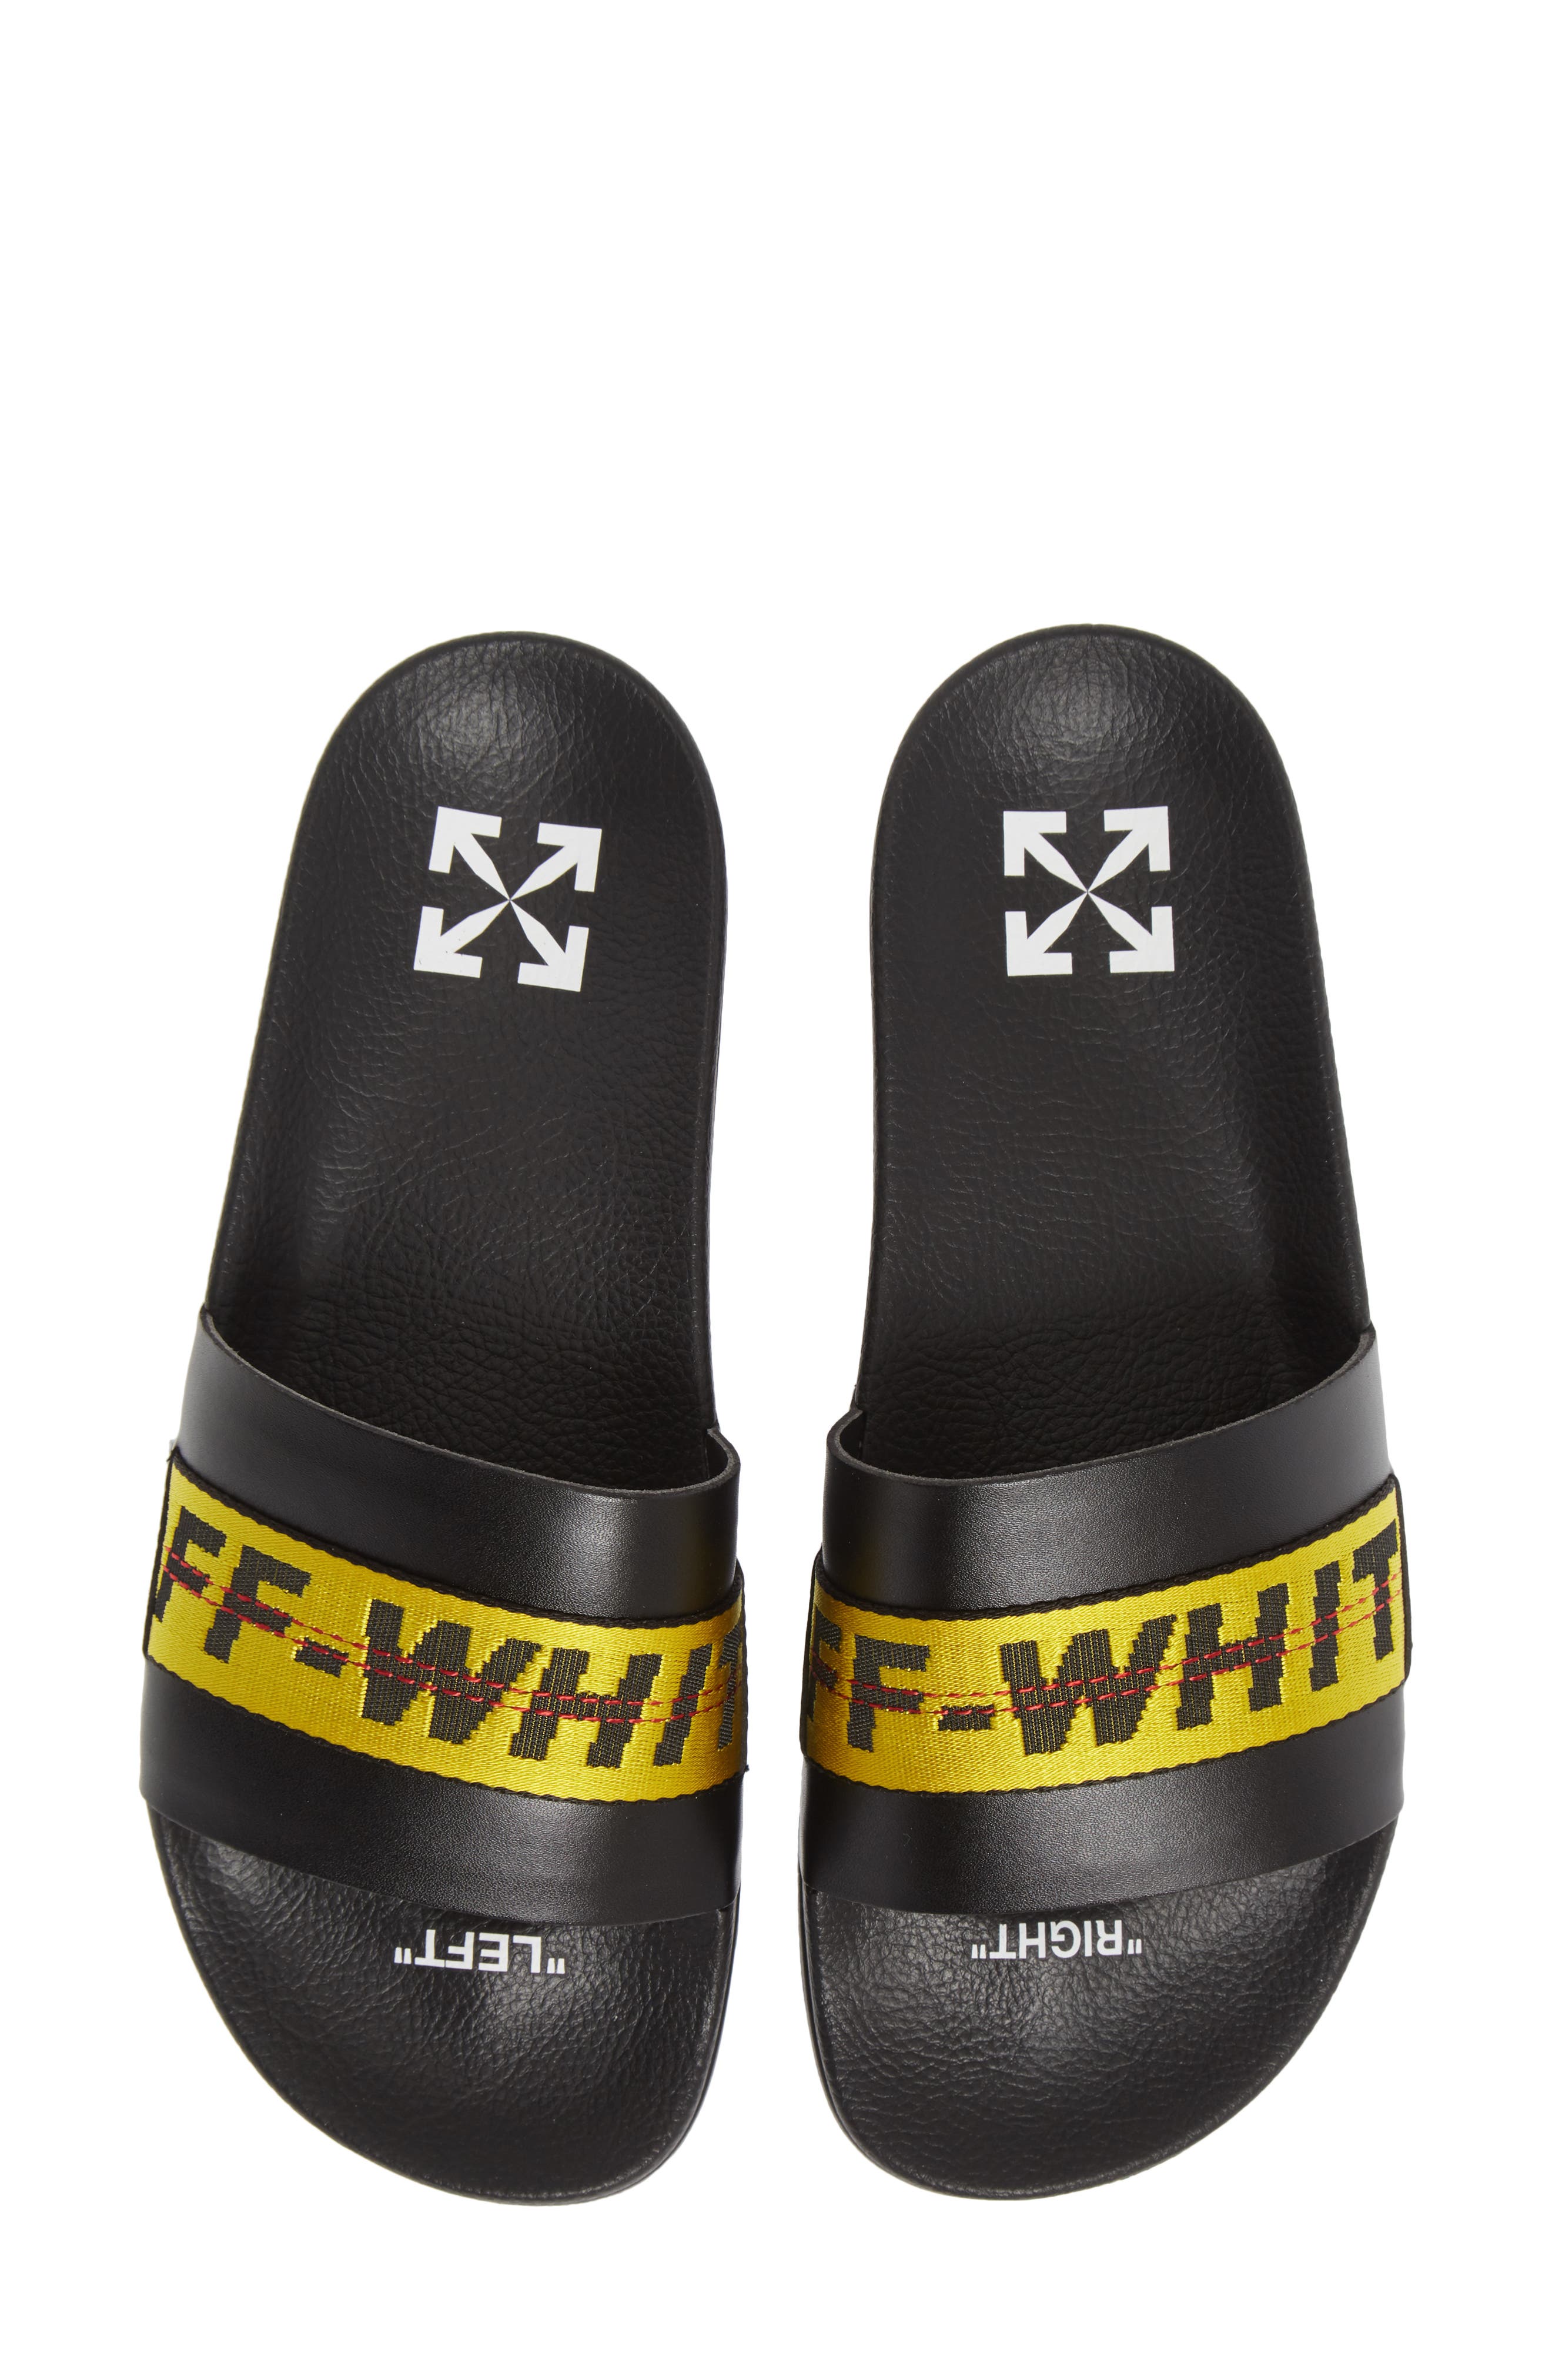 nordstrom off white shoes